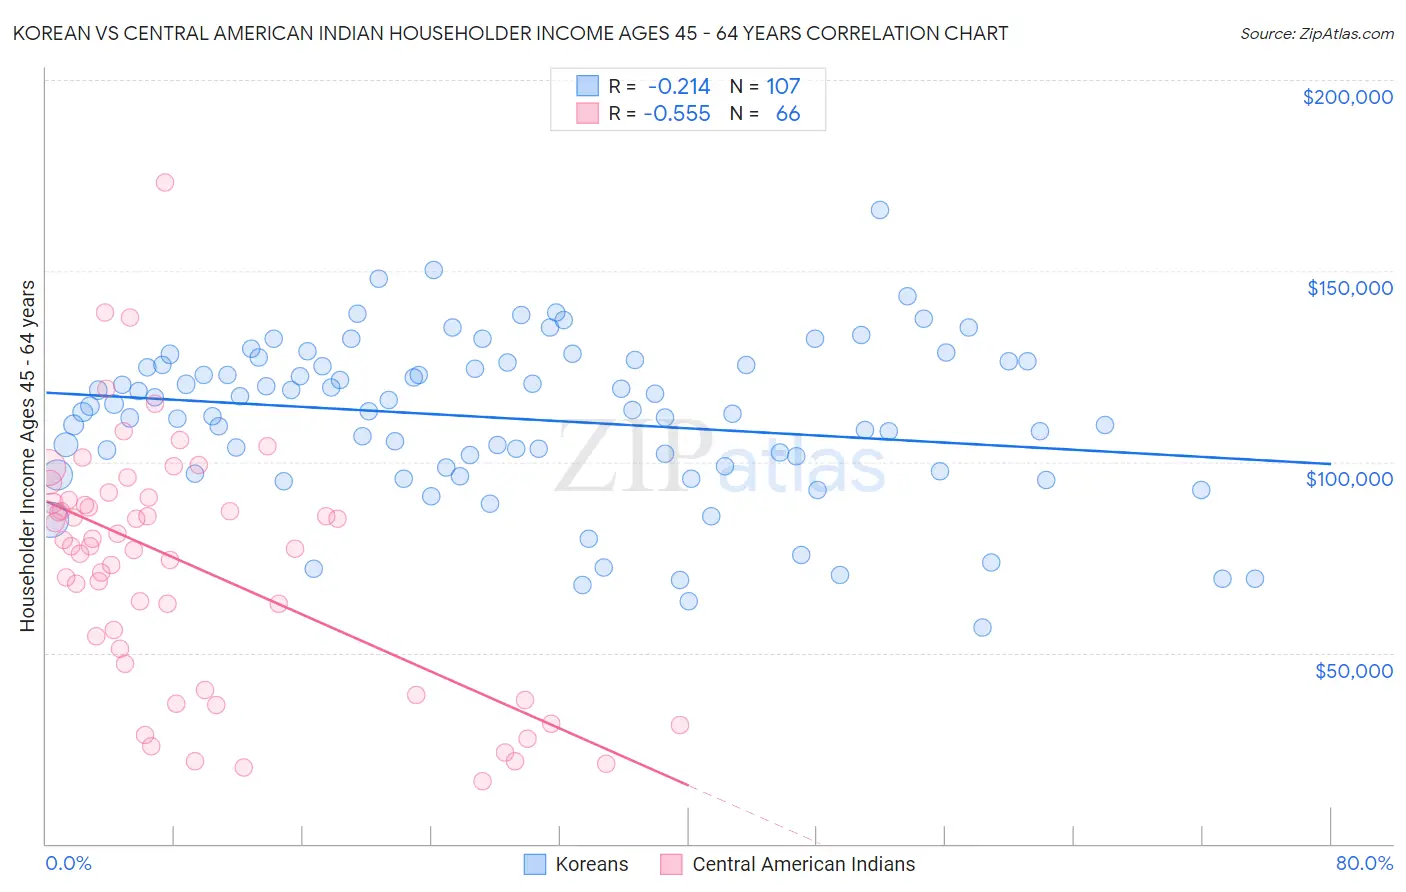 Korean vs Central American Indian Householder Income Ages 45 - 64 years